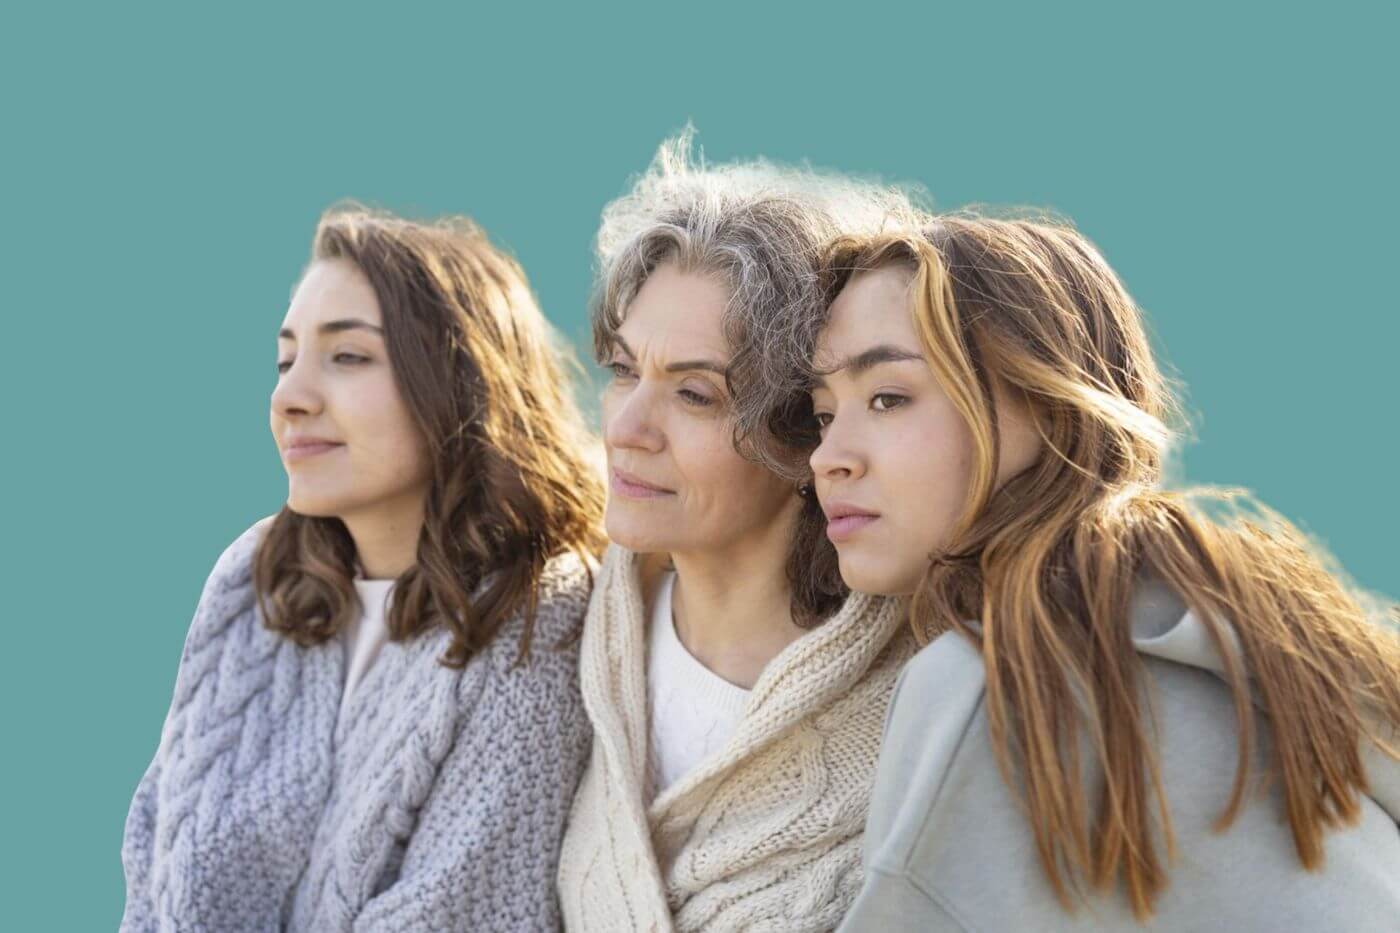 PCOS Sisters Three older women, their expressions reflecting *mental health*, gaze at each other.